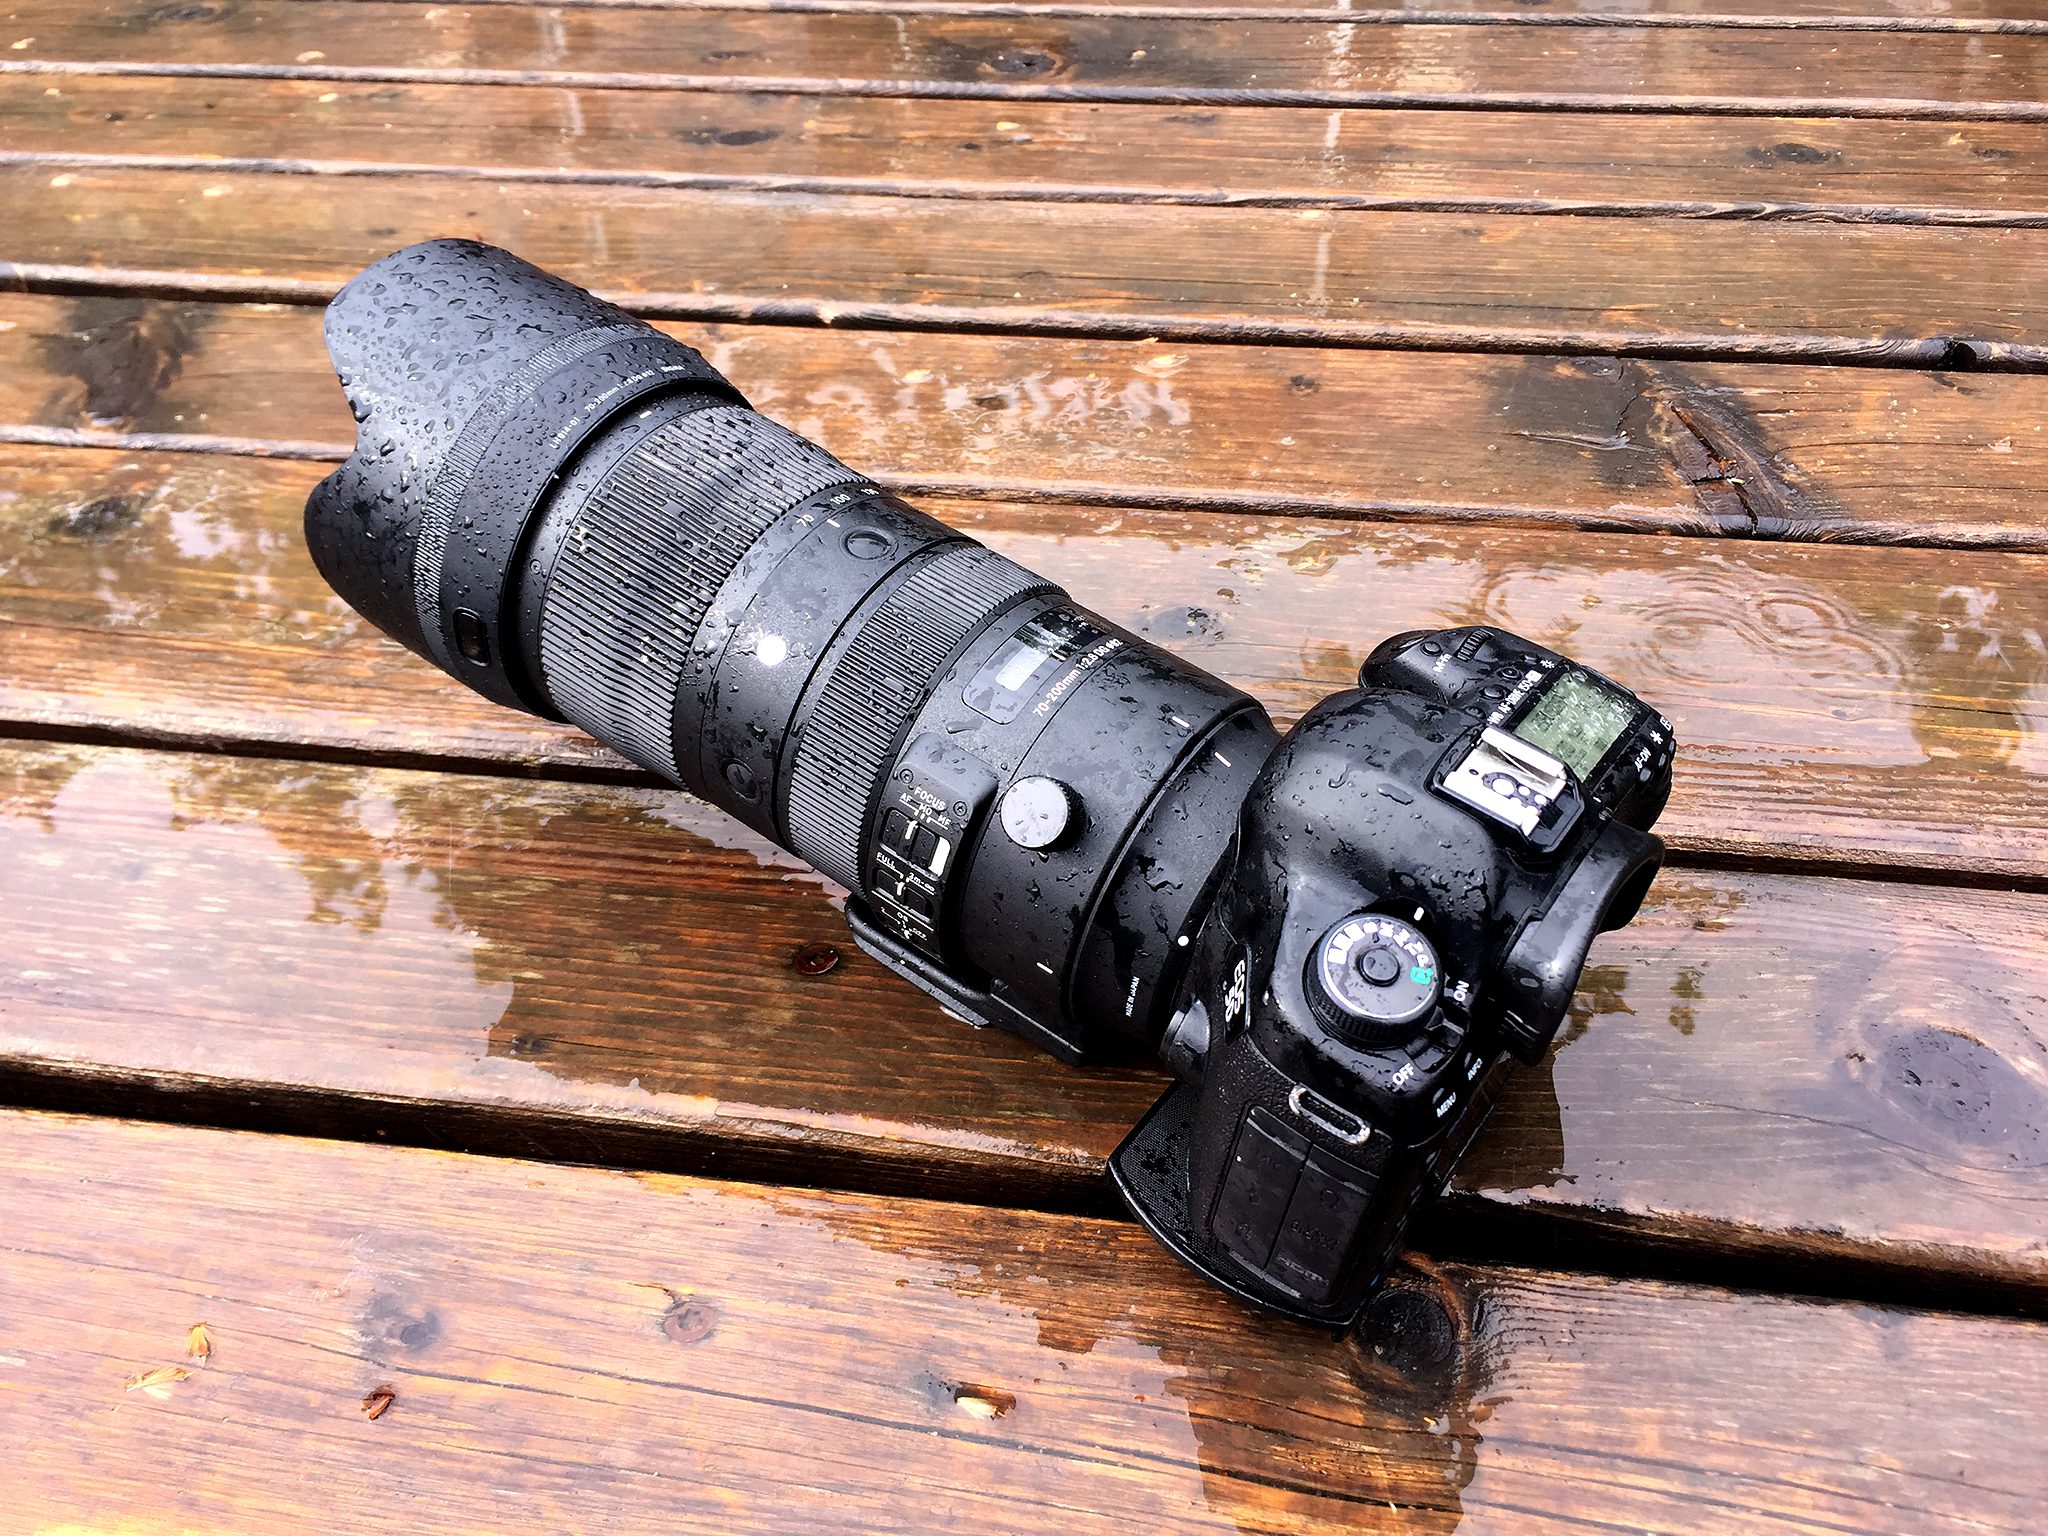  Review Sigma 70-200mm f2.8 HG OS HSM Sport